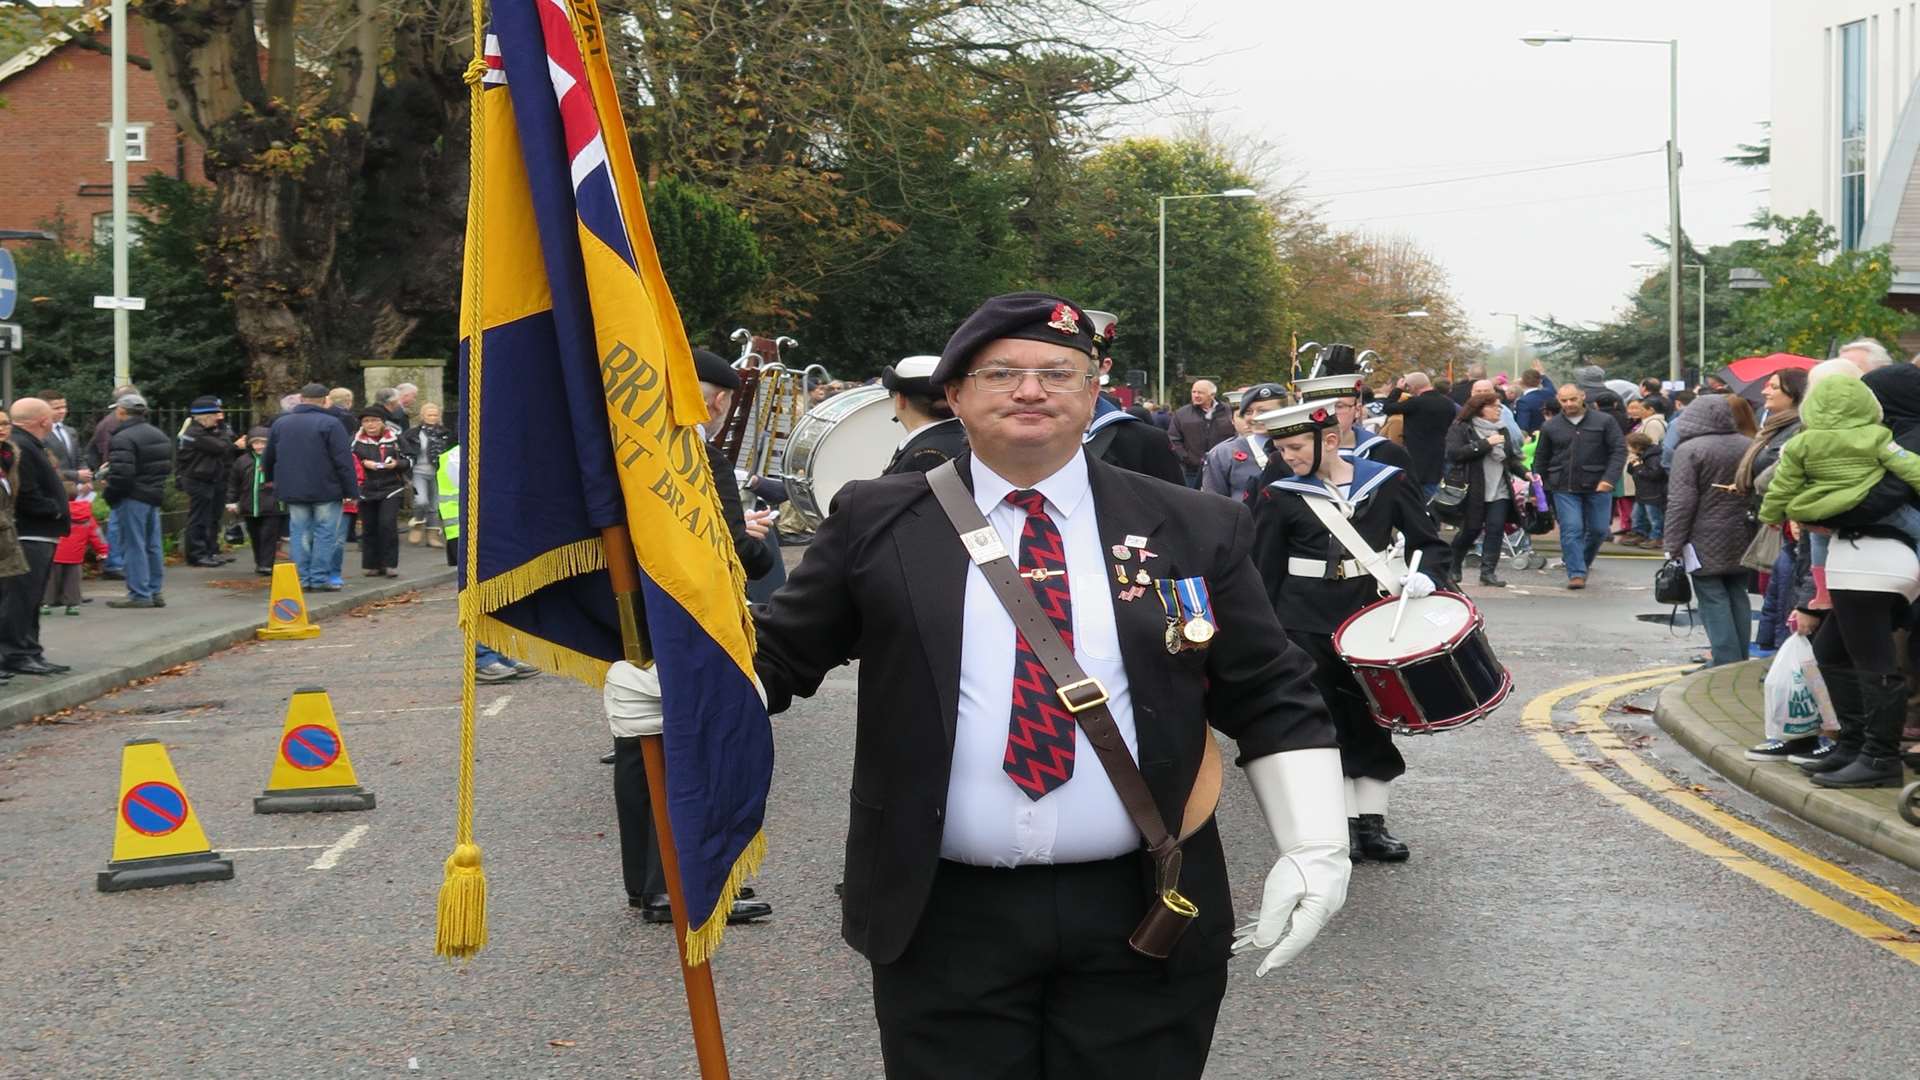 Derek Russell on parade for Remembrance Sunday